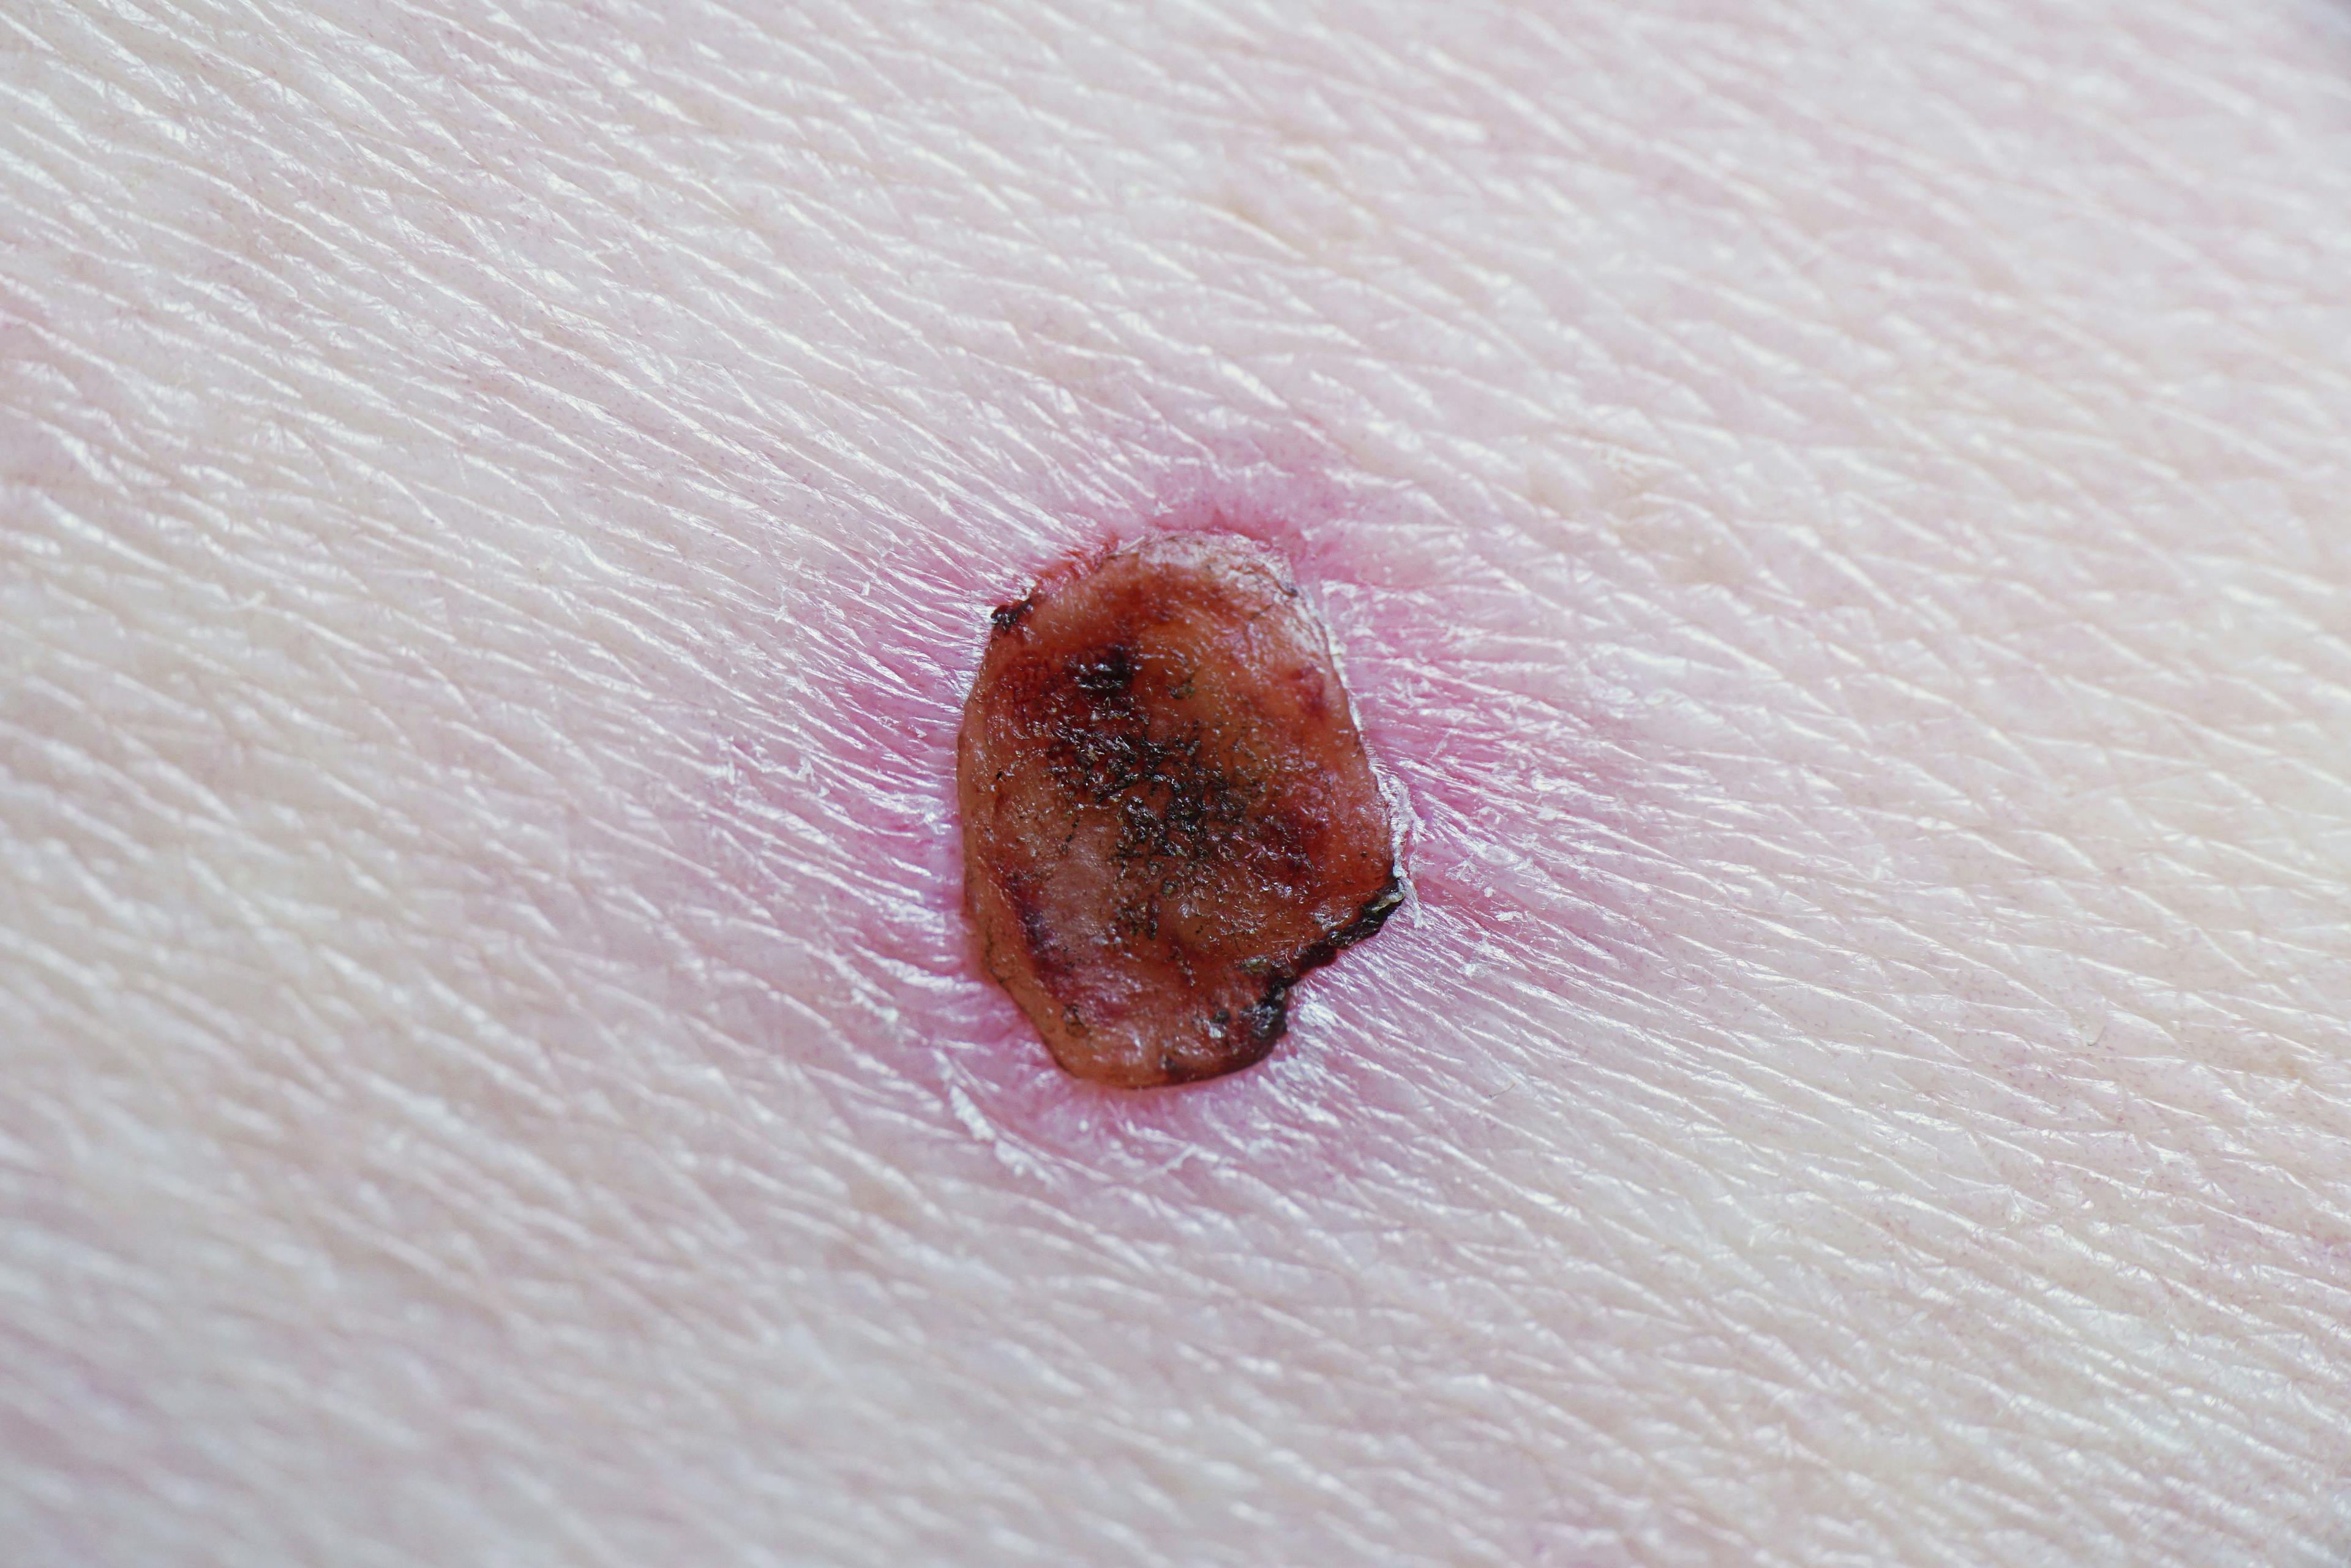 New Directions in the Treatment of Basal Cell Carcinoma